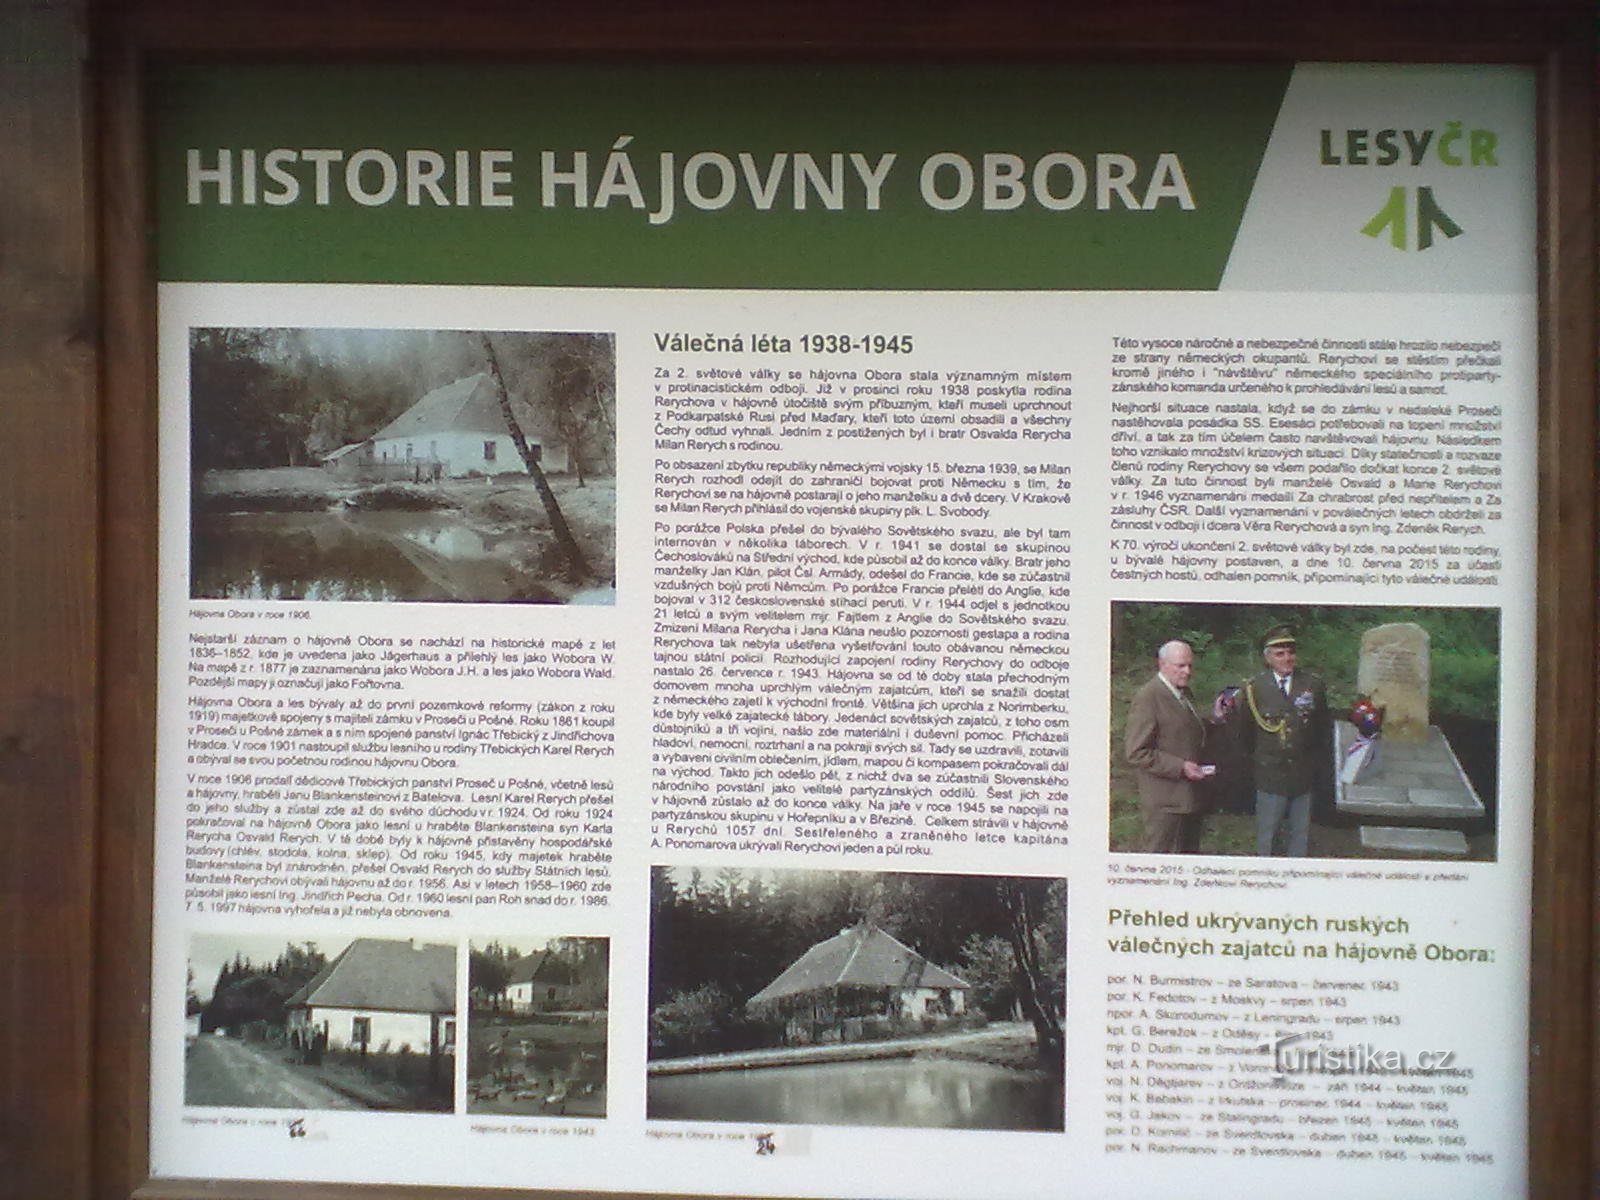 0. The former Rerychov hideout - during the war, the family hid escaped prisoners from concentration camps.